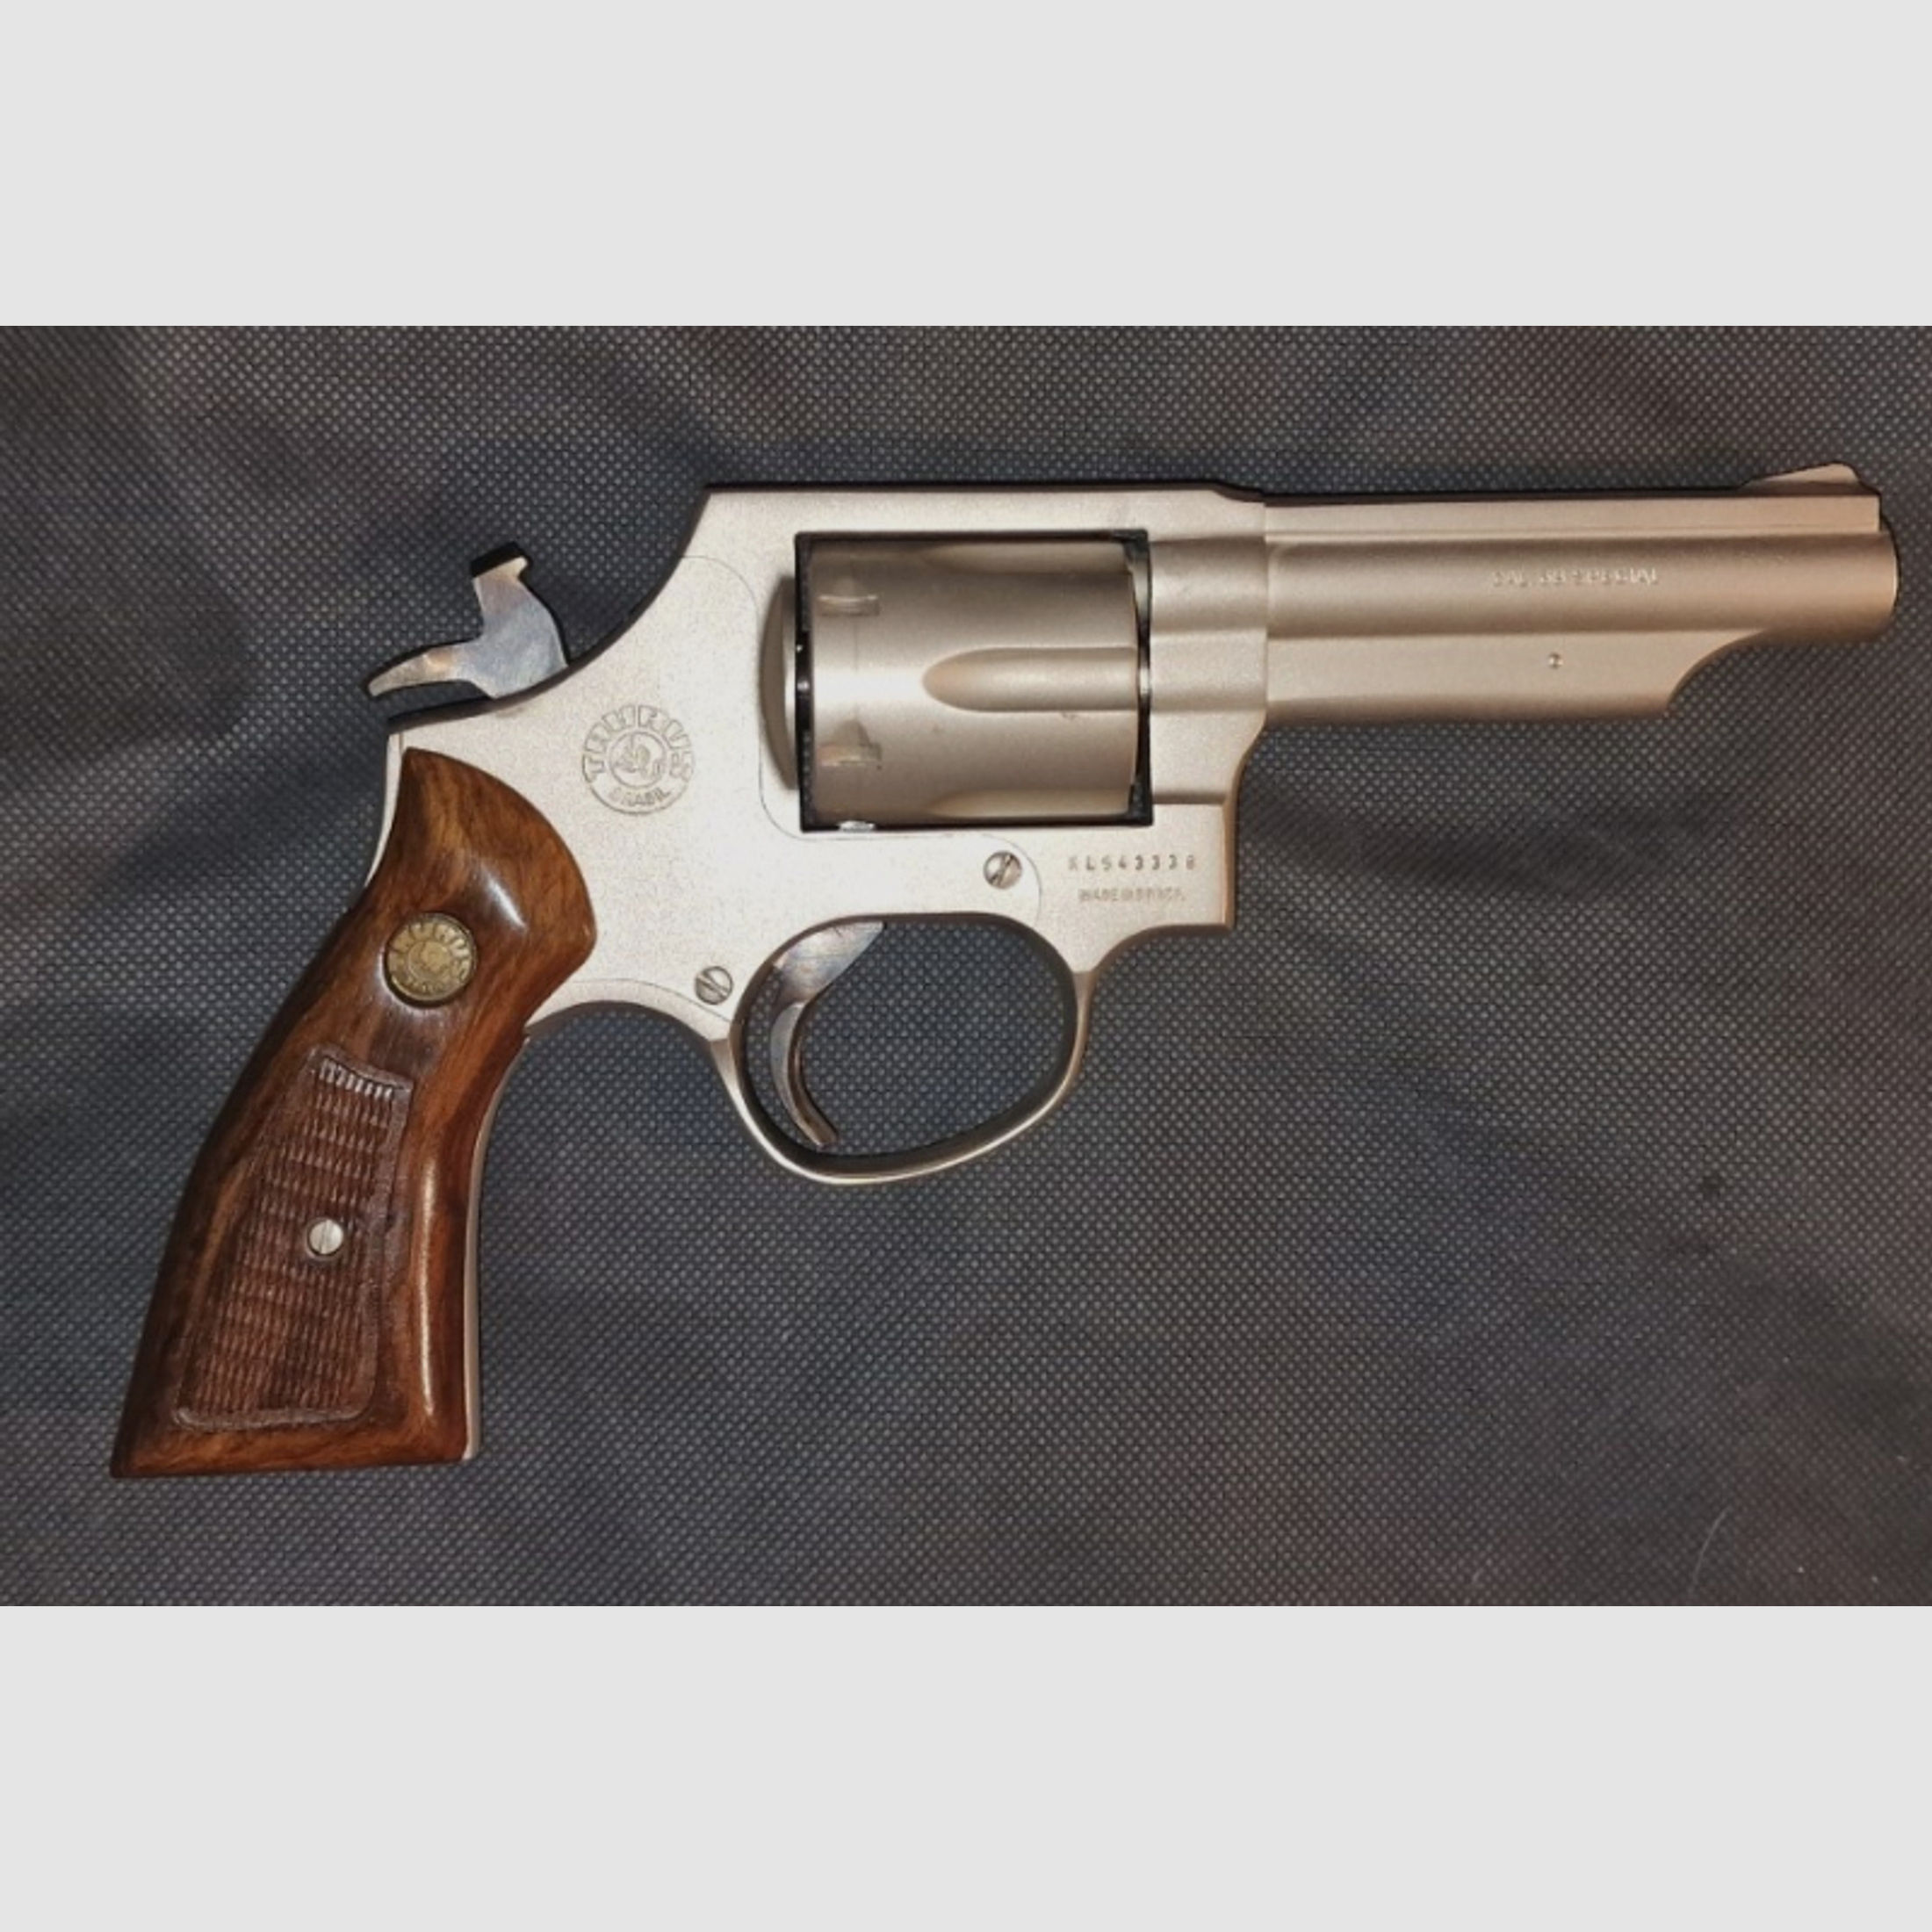 Taurus 82 .38Special, kein Smith & Wesson Colt, Single Action/Double Action Revolver Fangschuss